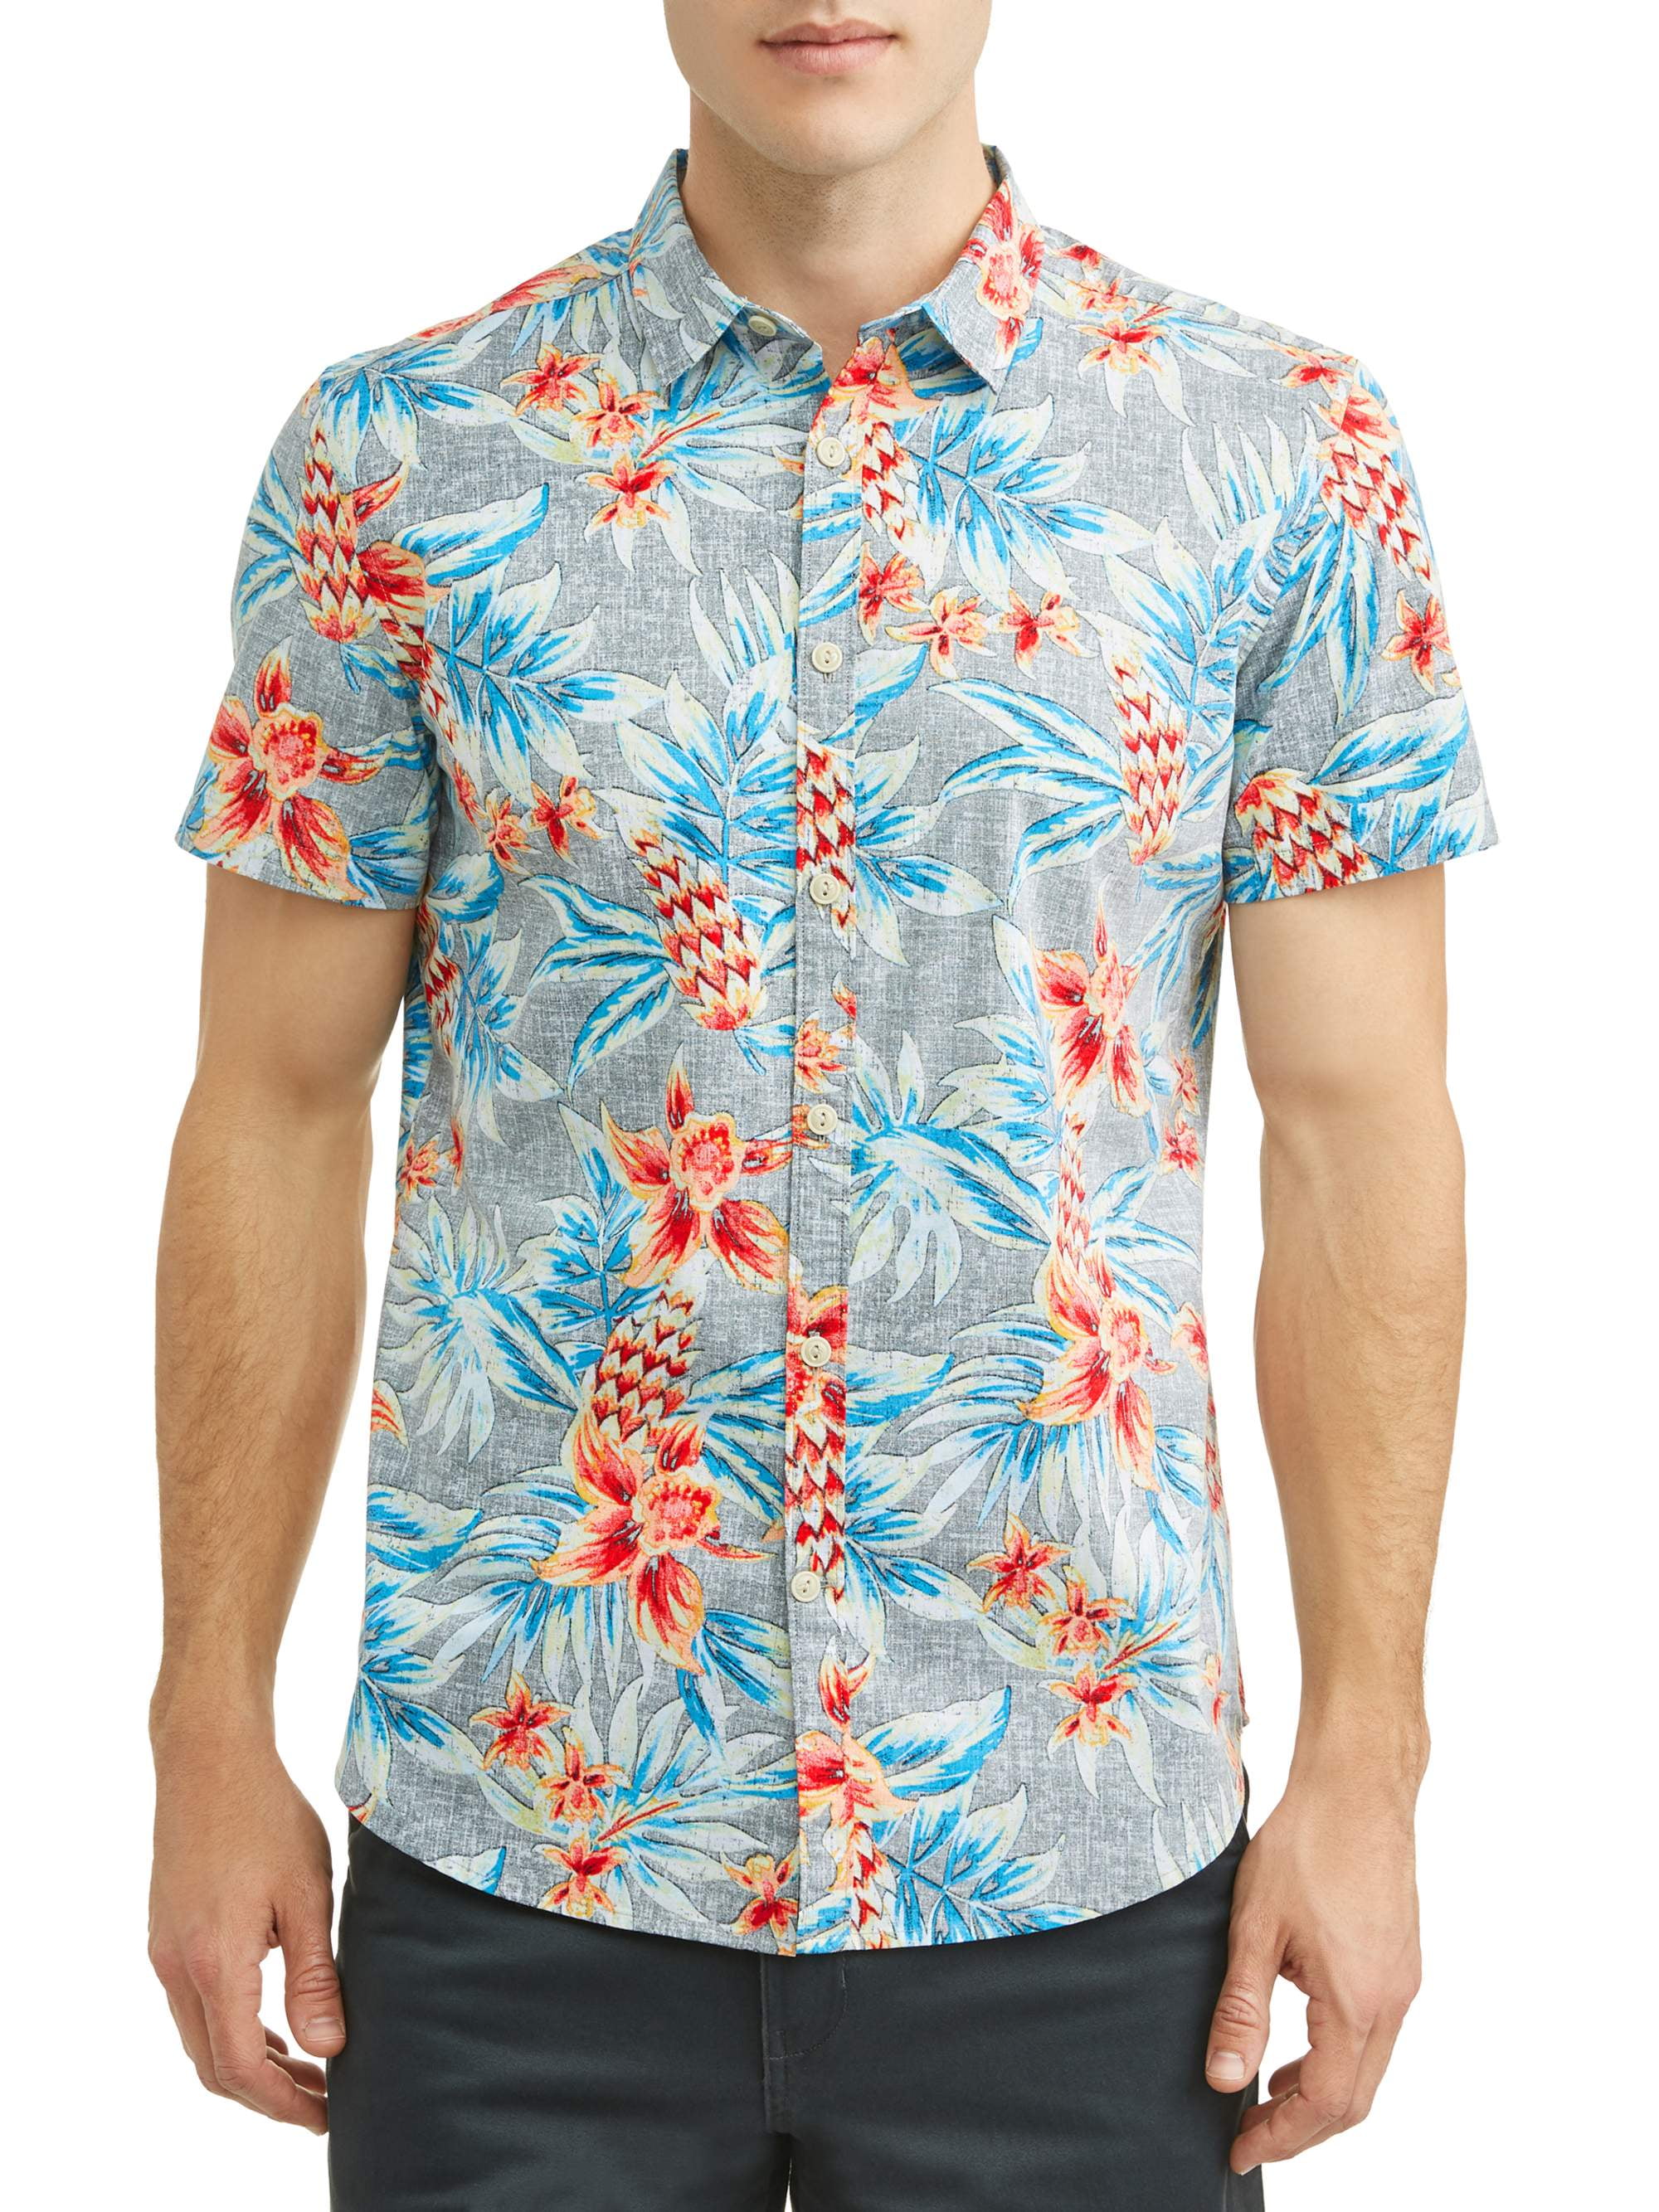 George Young Men's short sleeve Printed Shirt, up to size 3XL - Walmart.com